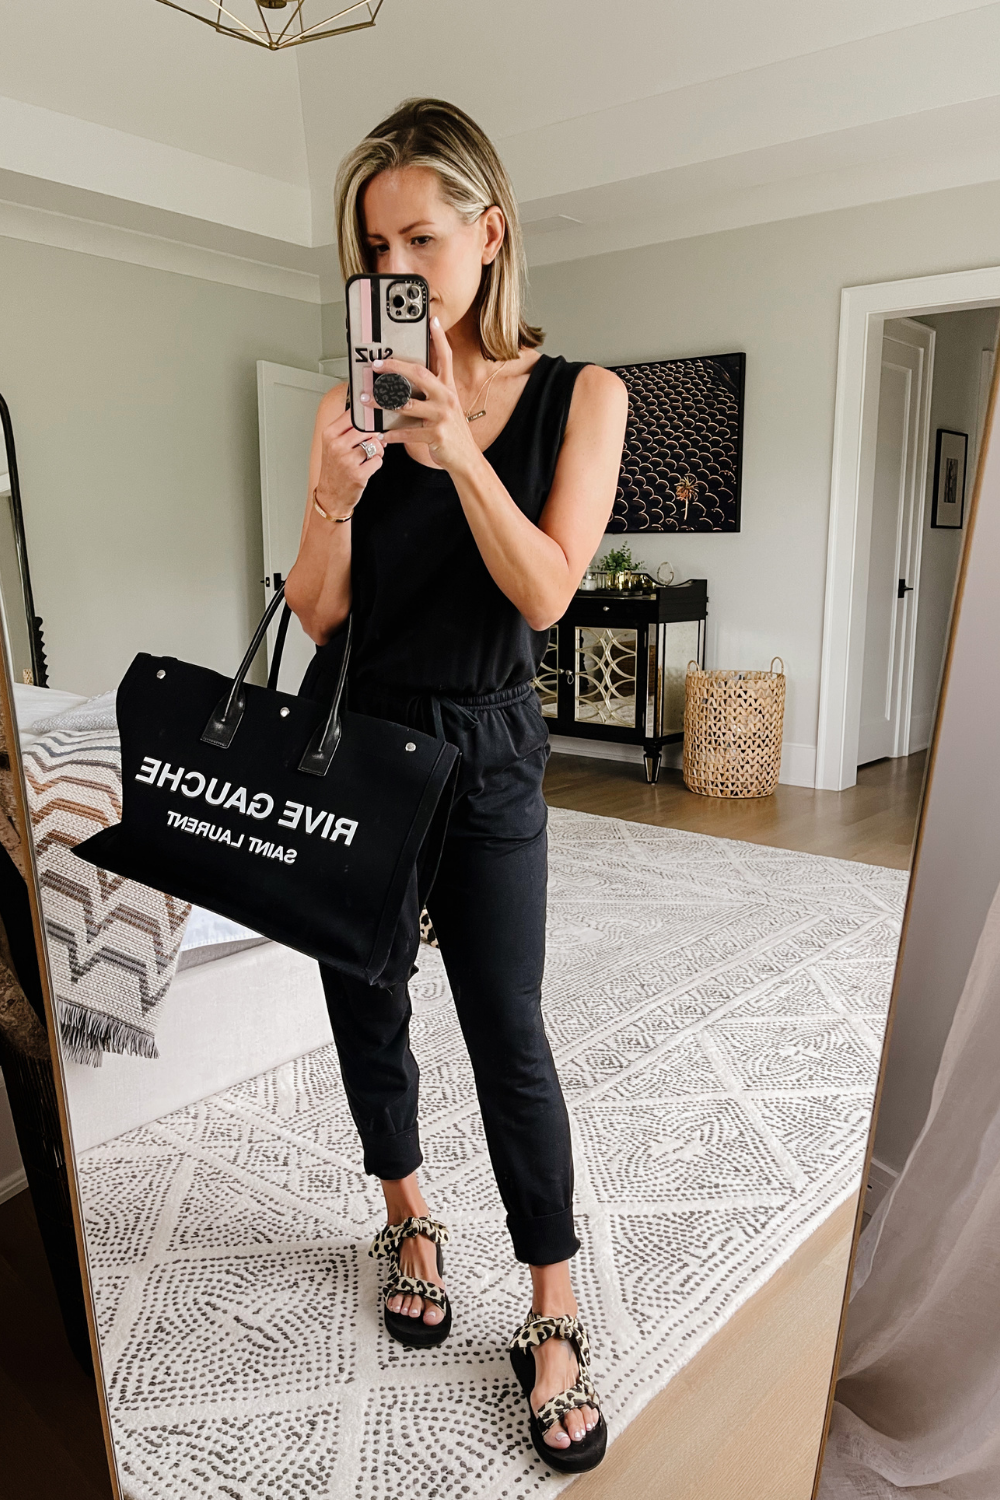 Suzanne wearing a black Amazon jumpsuit, sport sandals, and a tote bag